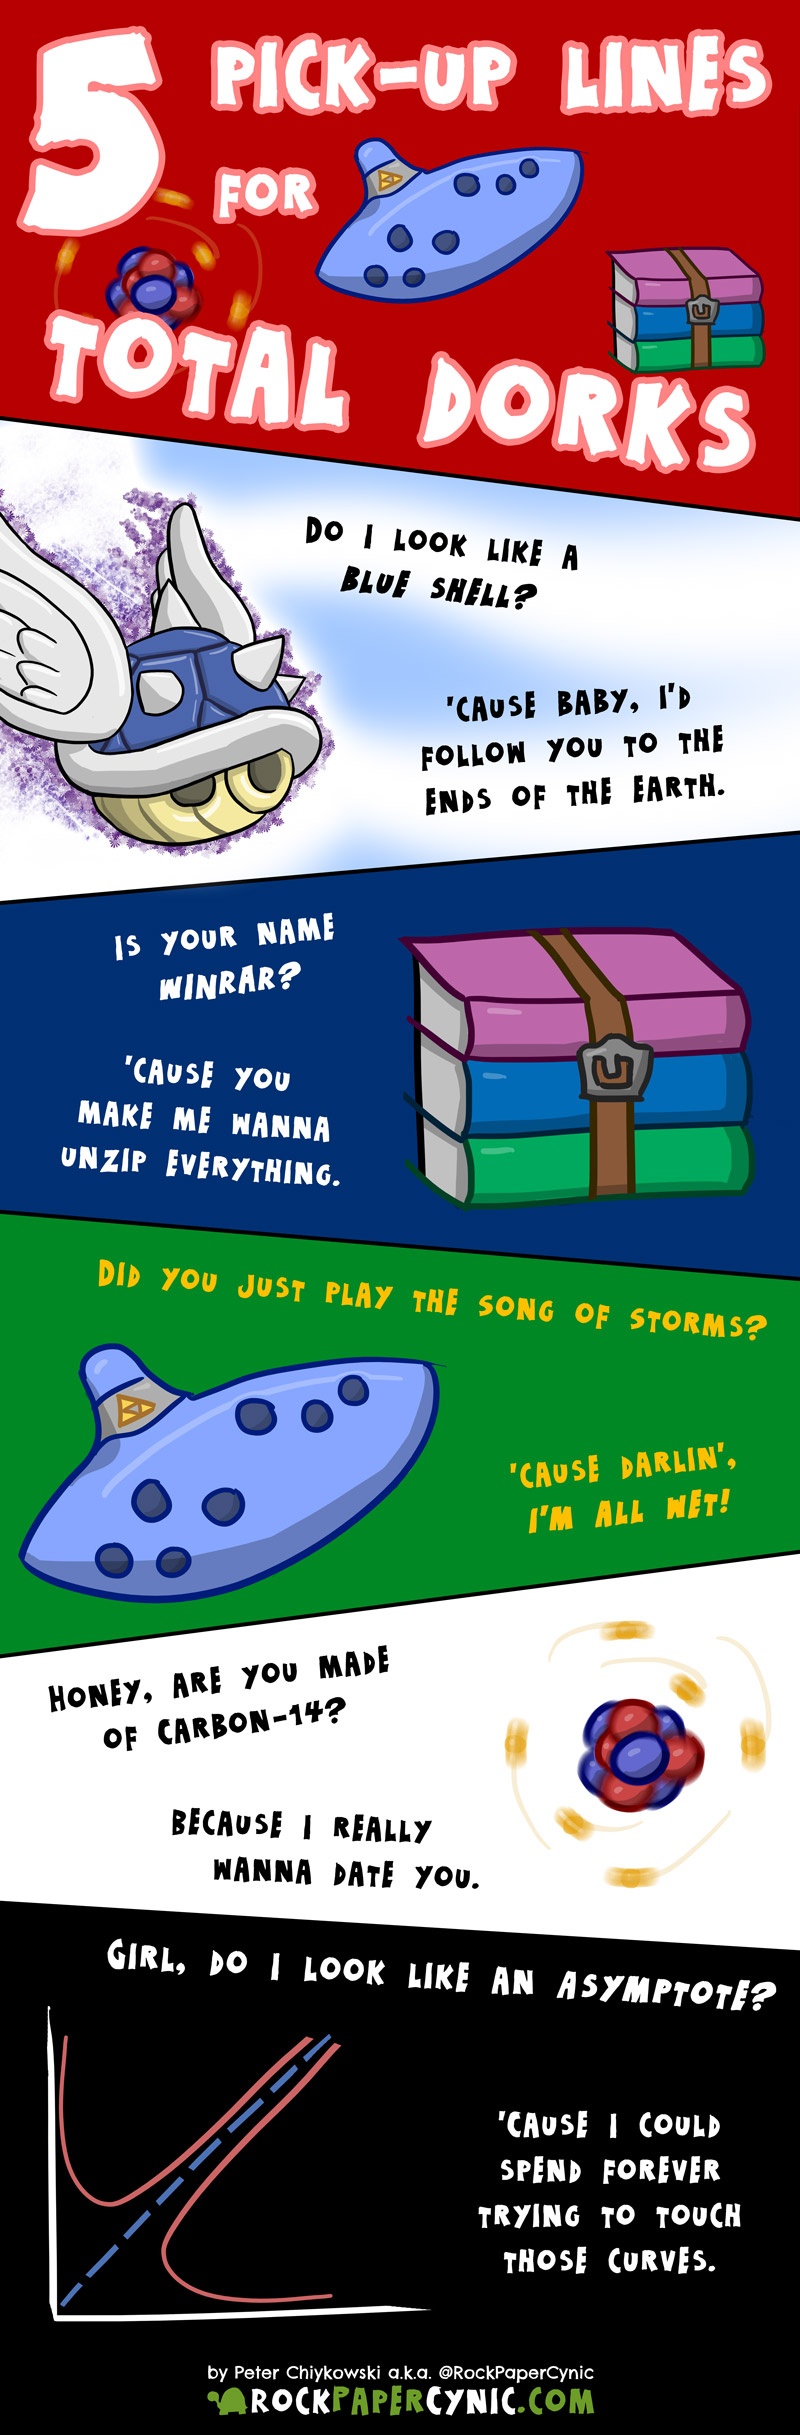 pick-up lines for those who love Carbon-14, blue shells, Song of Storms, WinRAR and asymptote